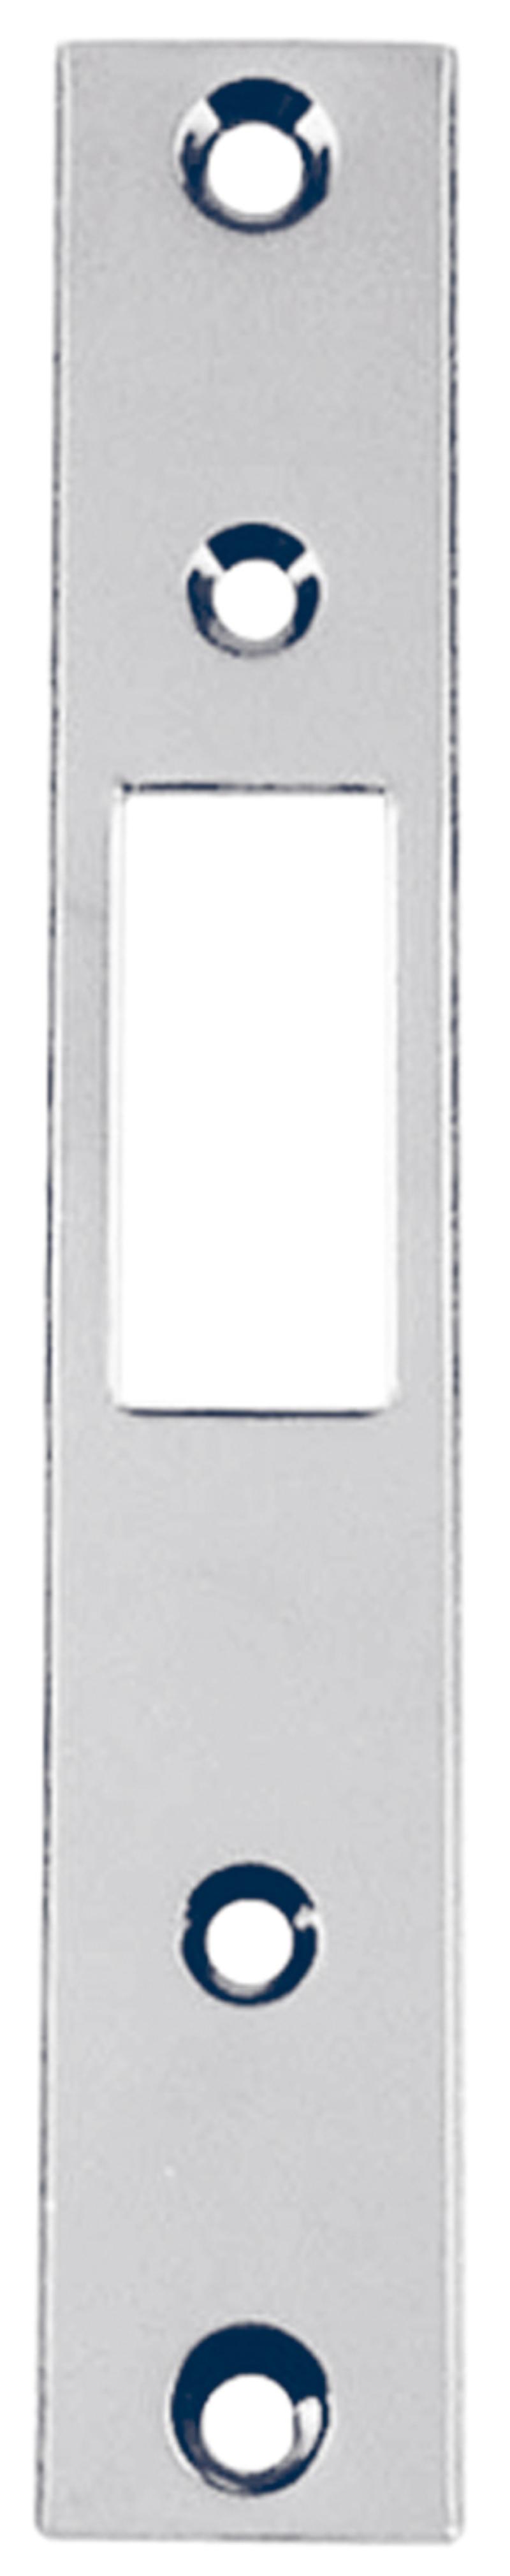 Abloy end plate 4614 (982001)